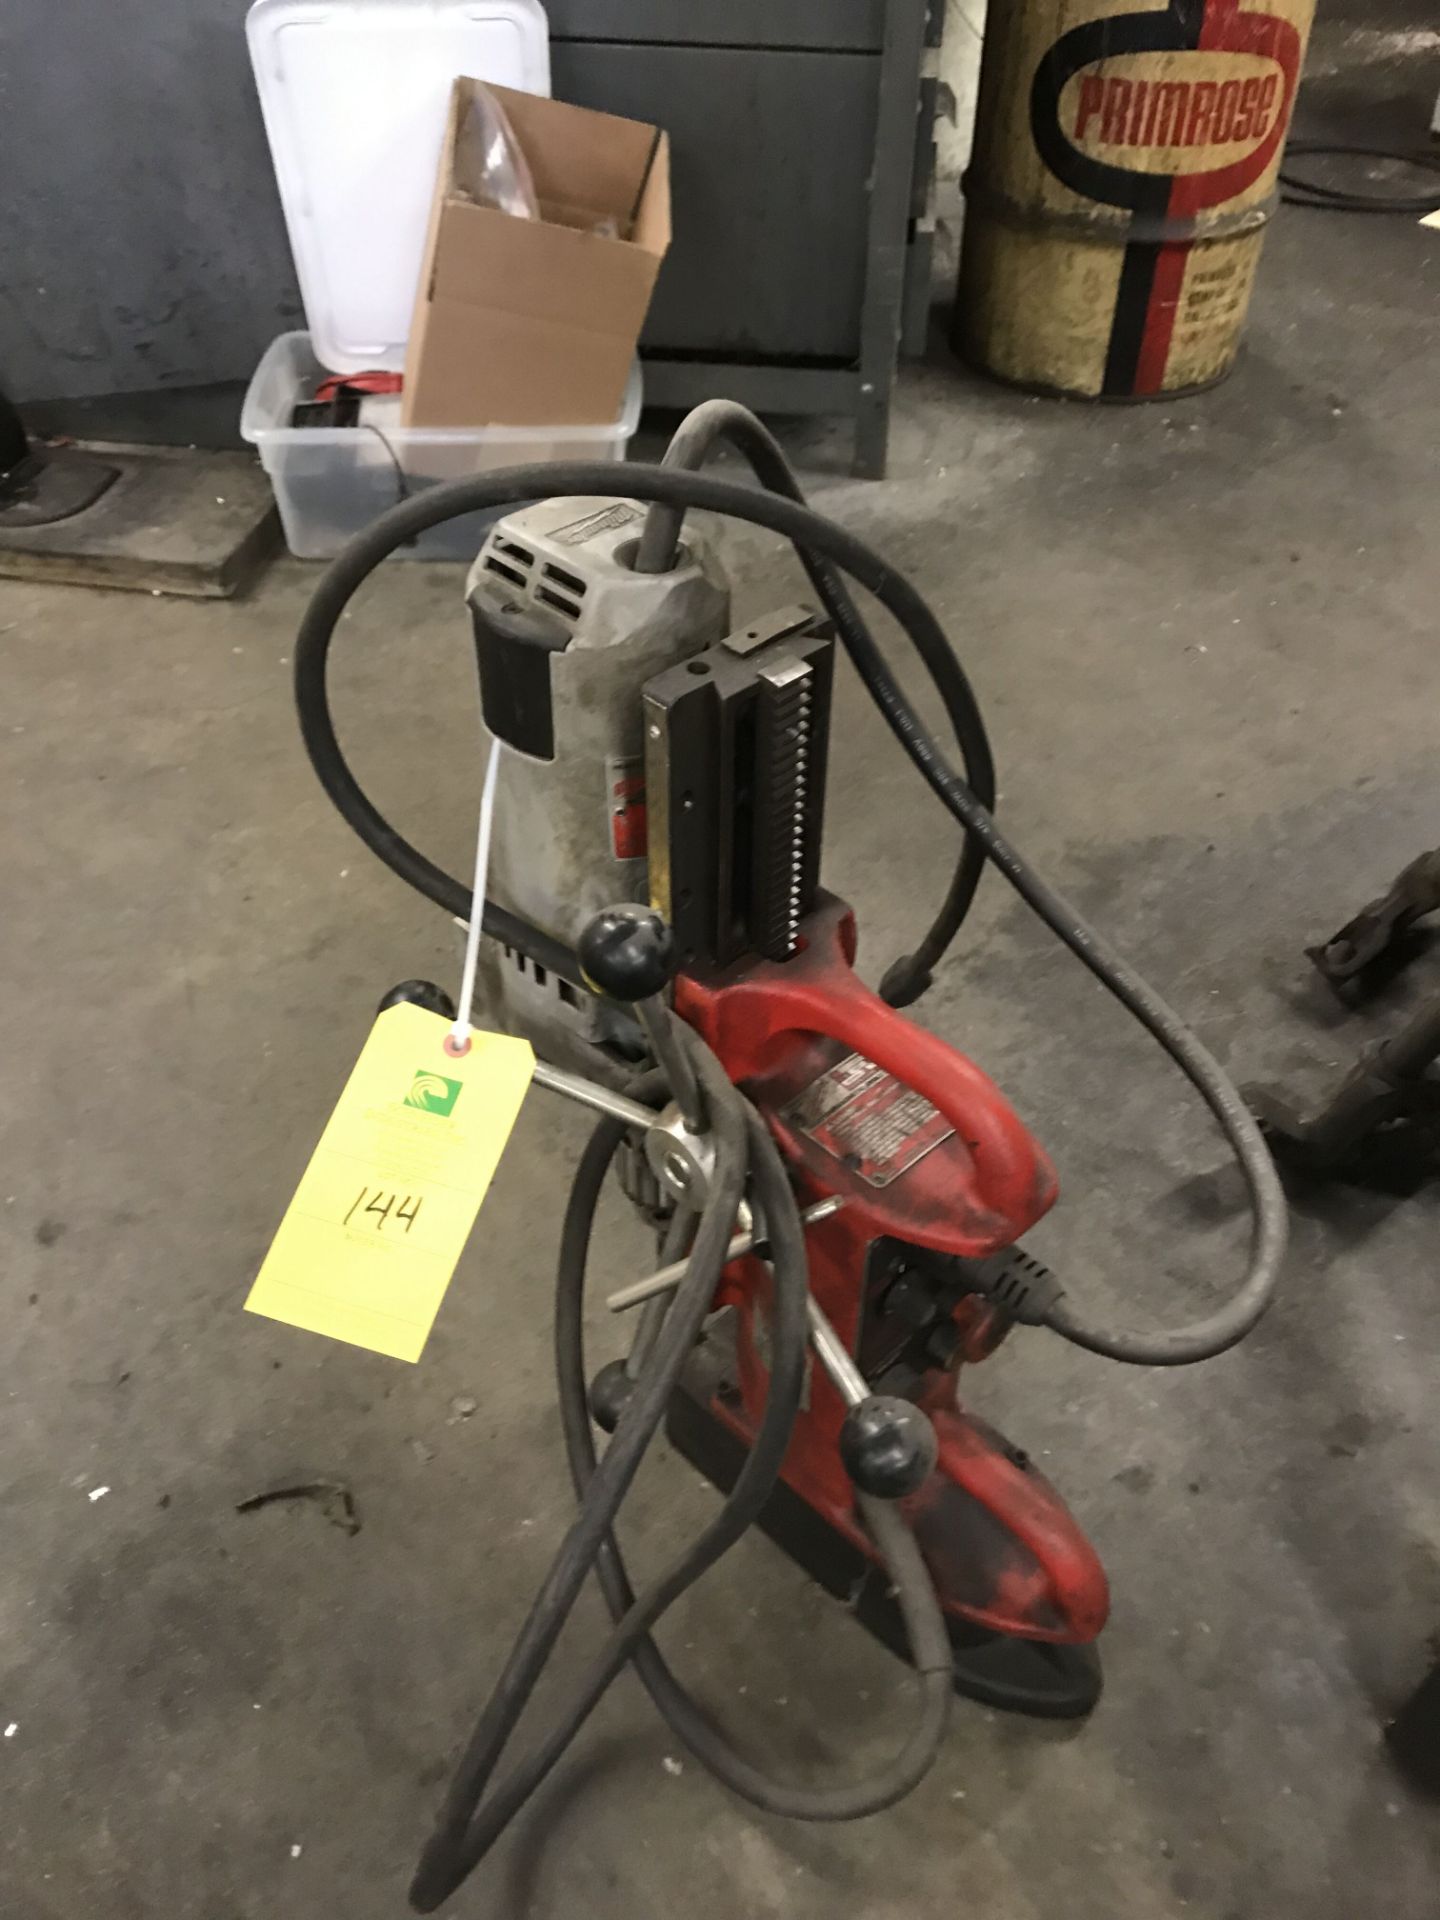 Milwaukee Magnetic Drill Press